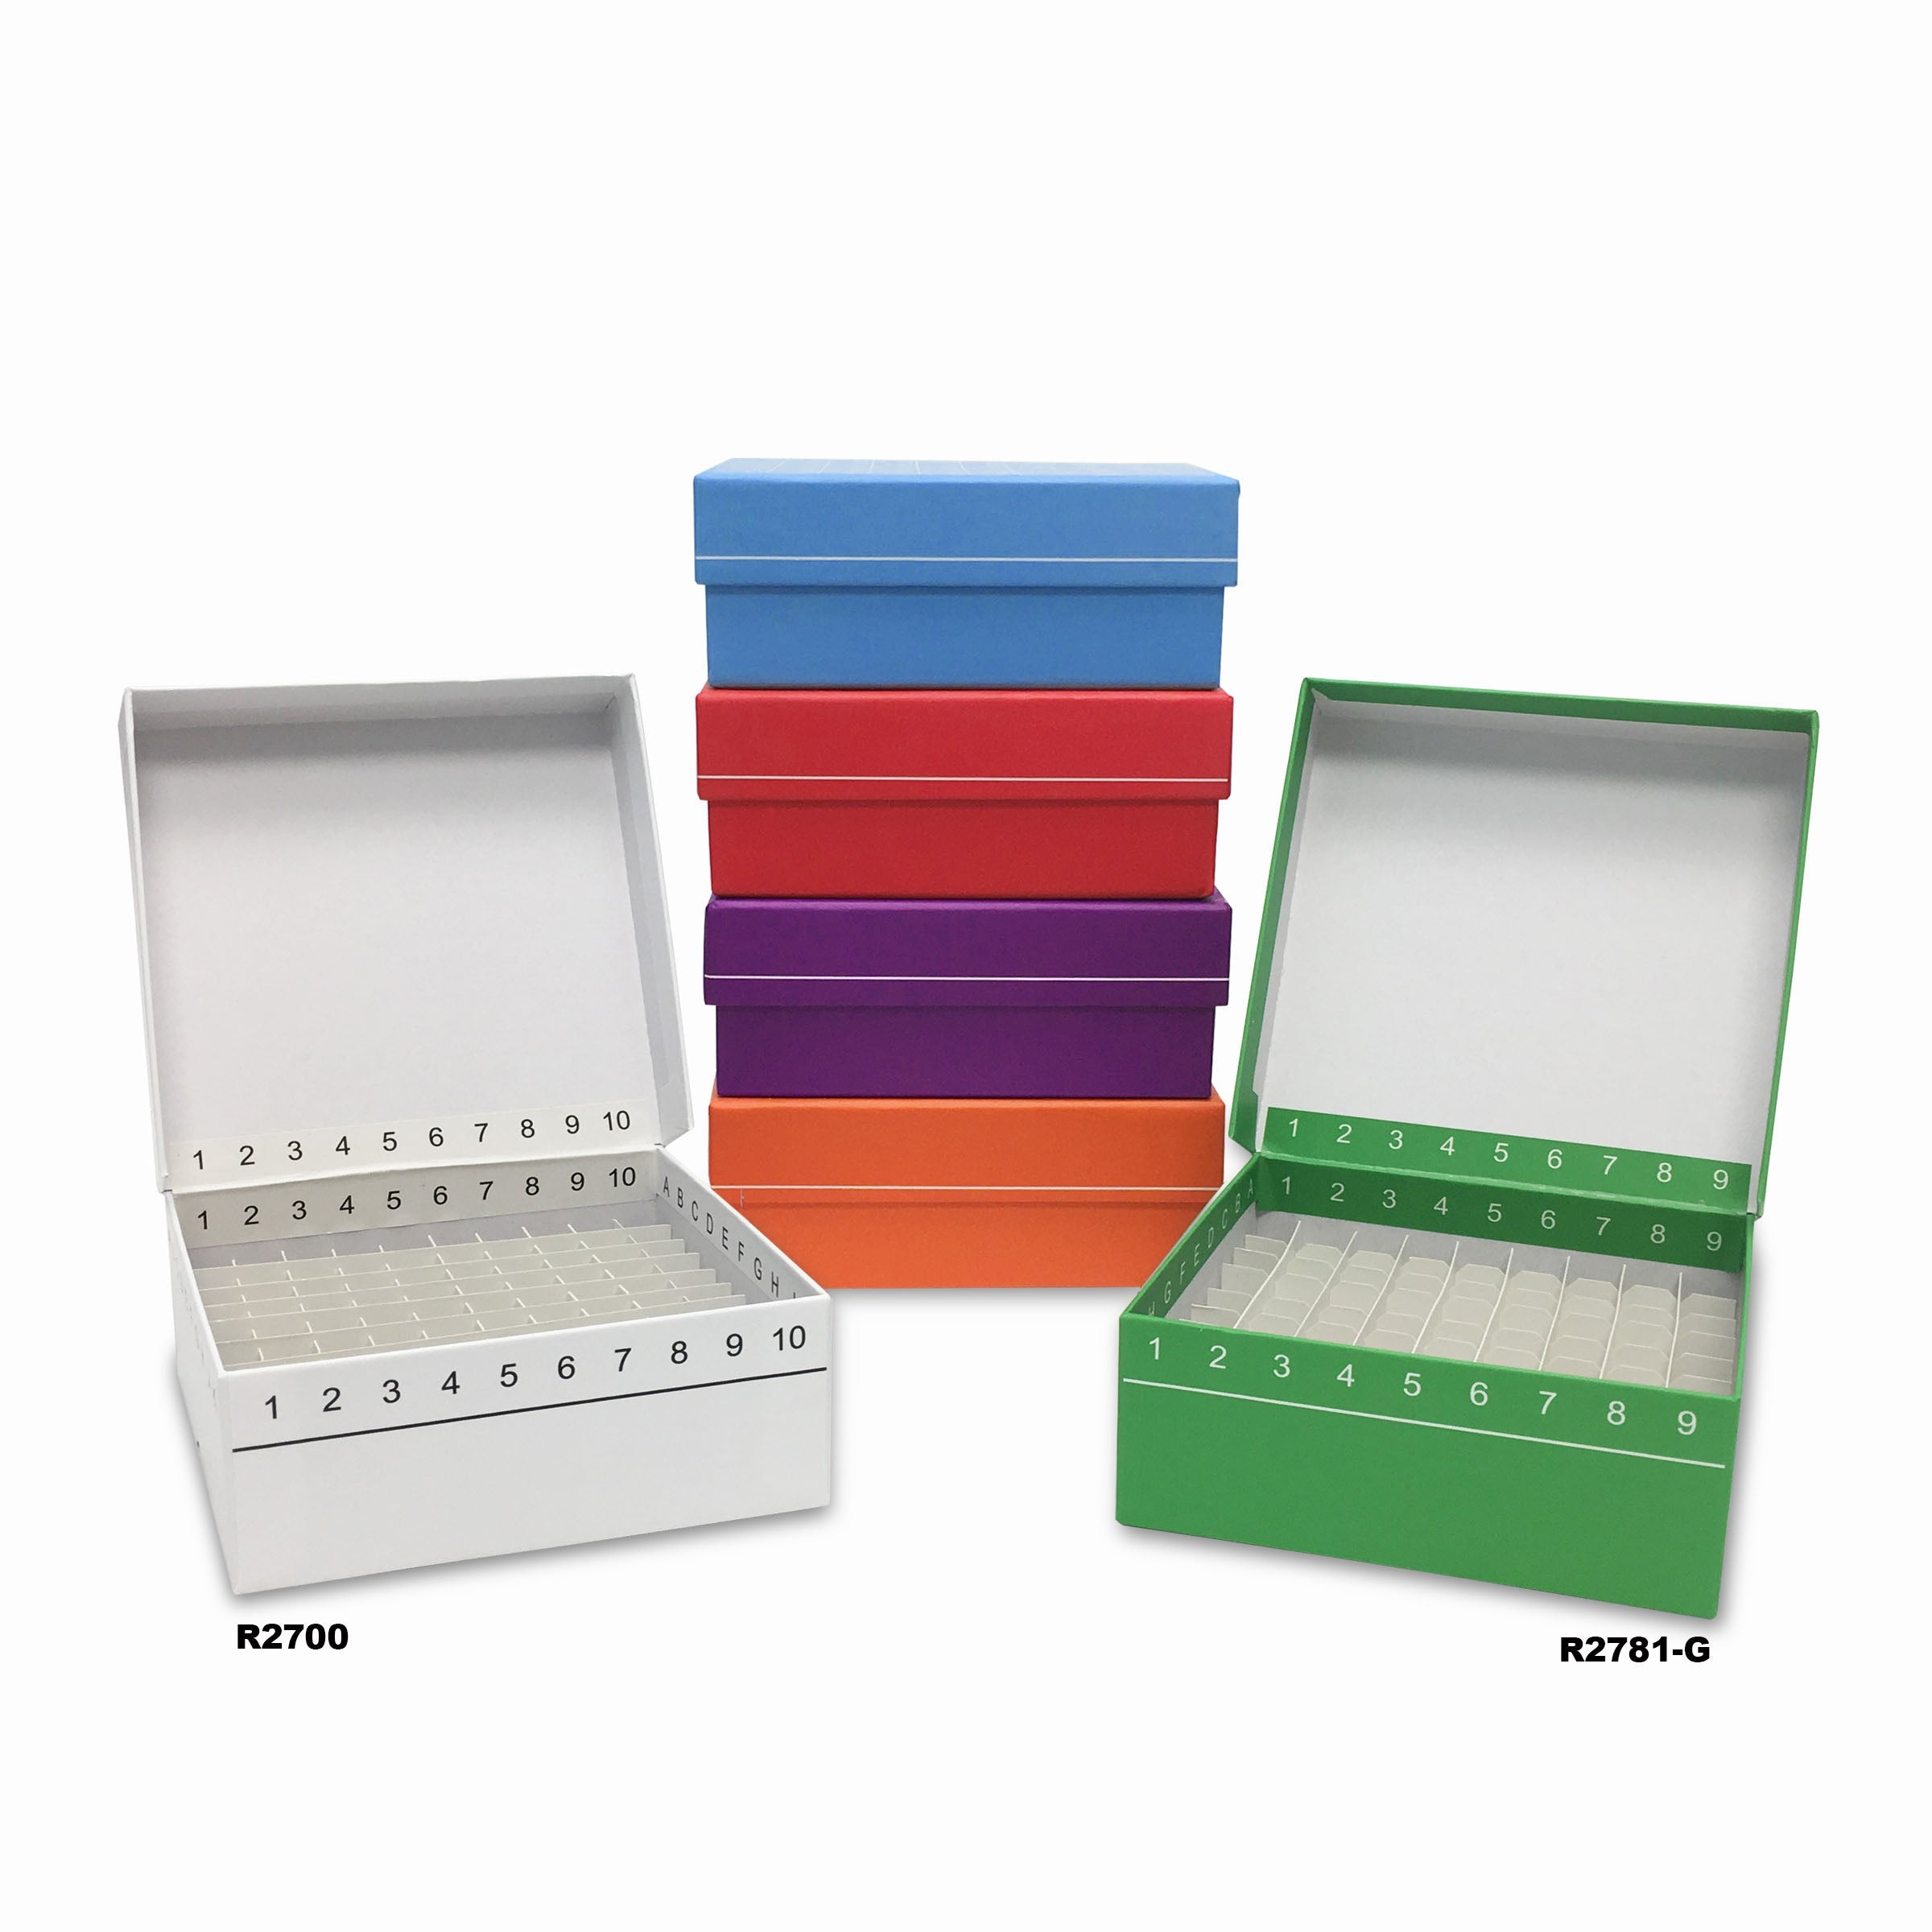 MTC Bio R2700-B, Fliptop Carboard Freezer Box with Attached Hinged Lid, 100-Place, Blue, 5/pk